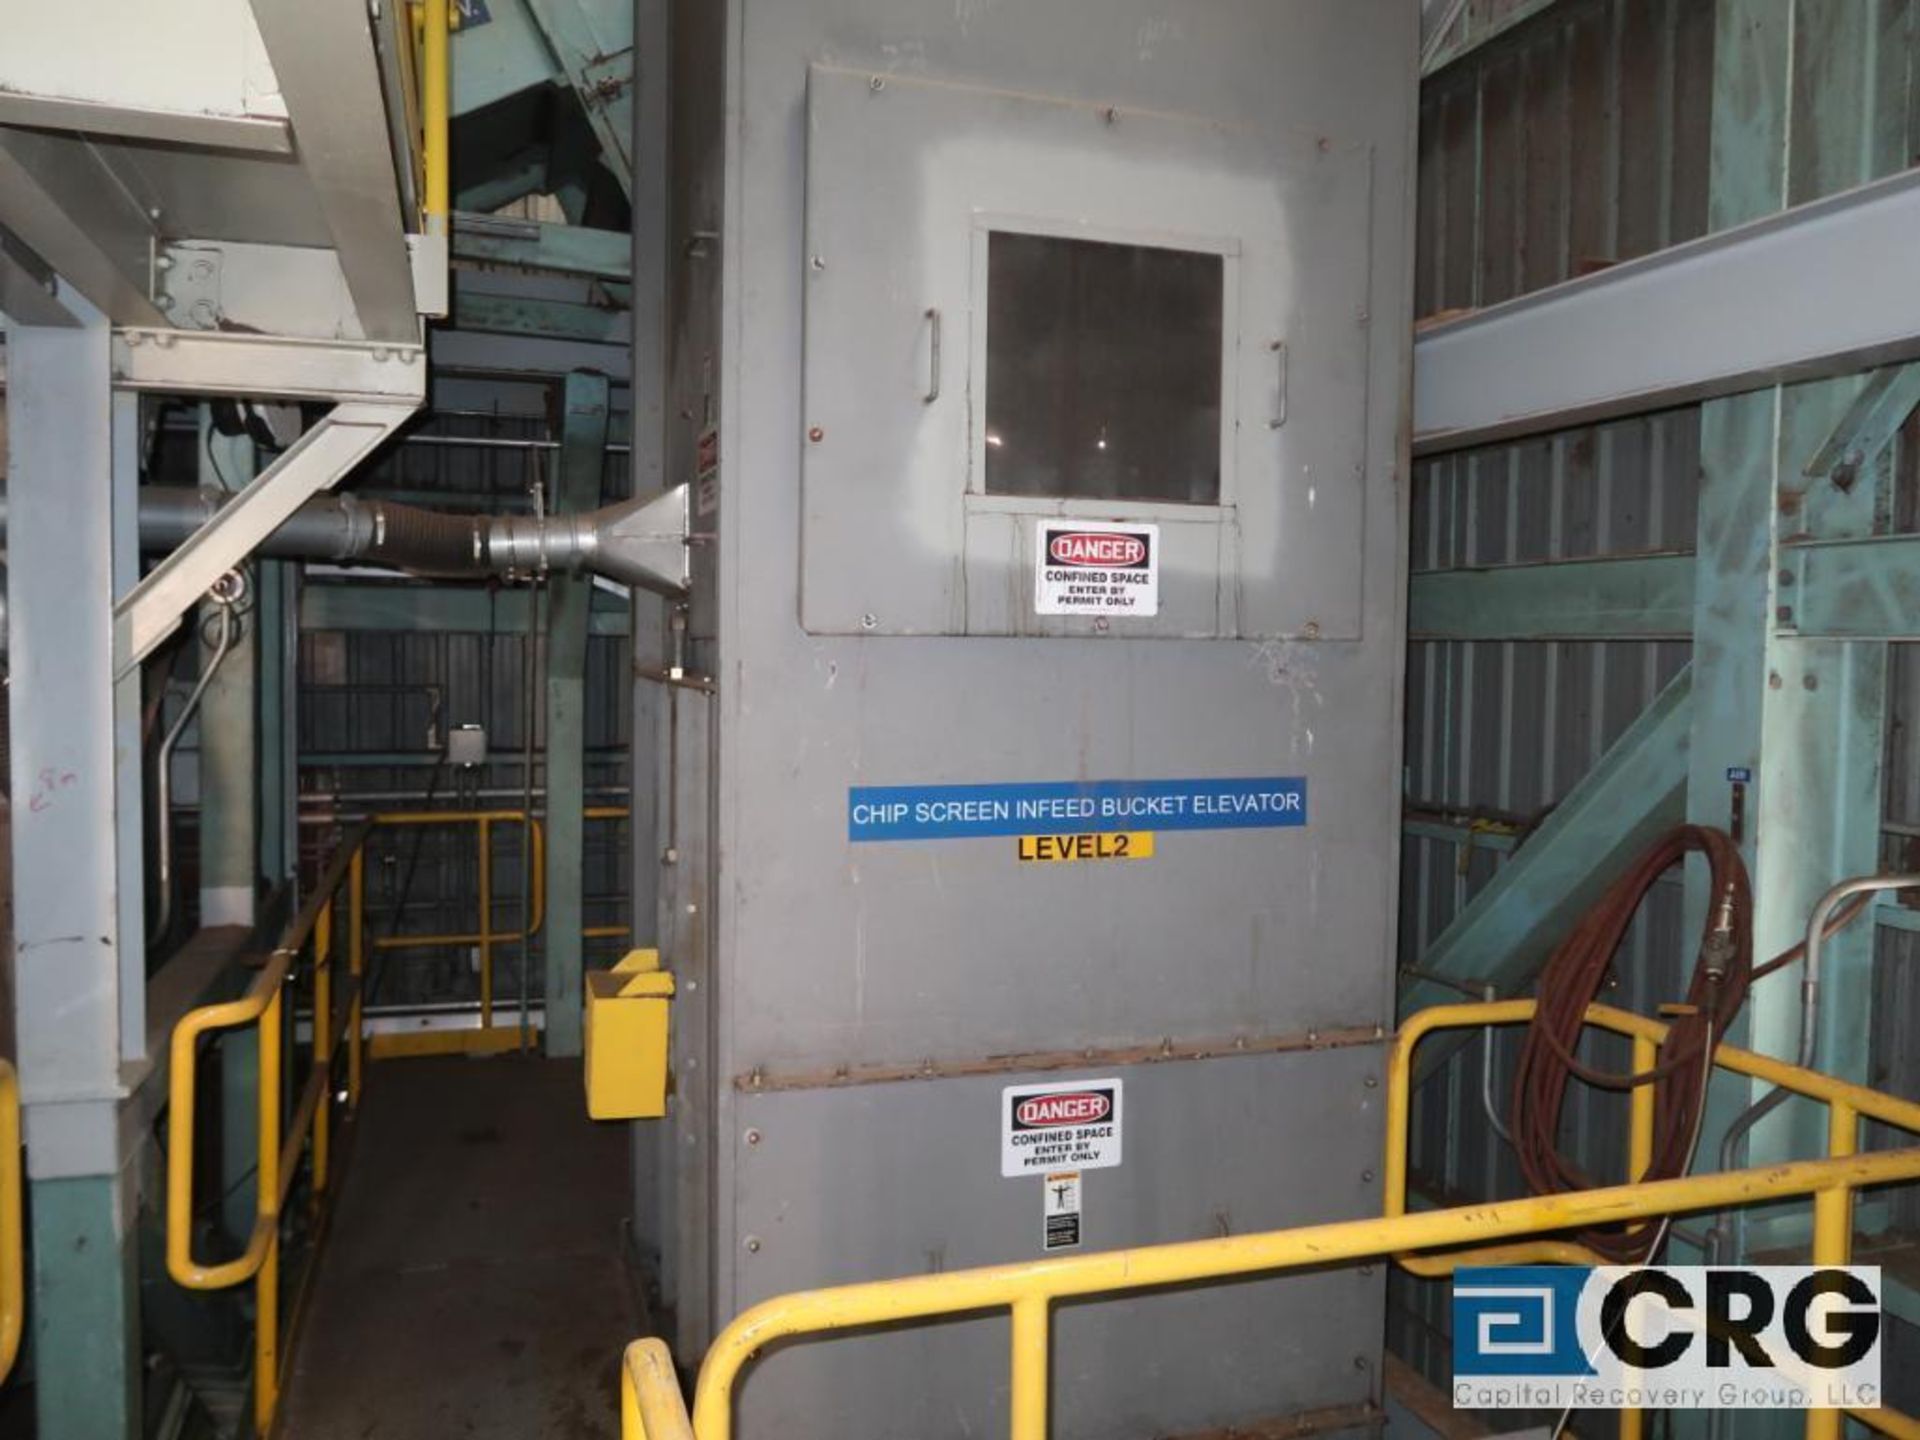 Complete 100 ton per hour/850 ton per day chip processing system. New installation in 2014. - Image 20 of 21